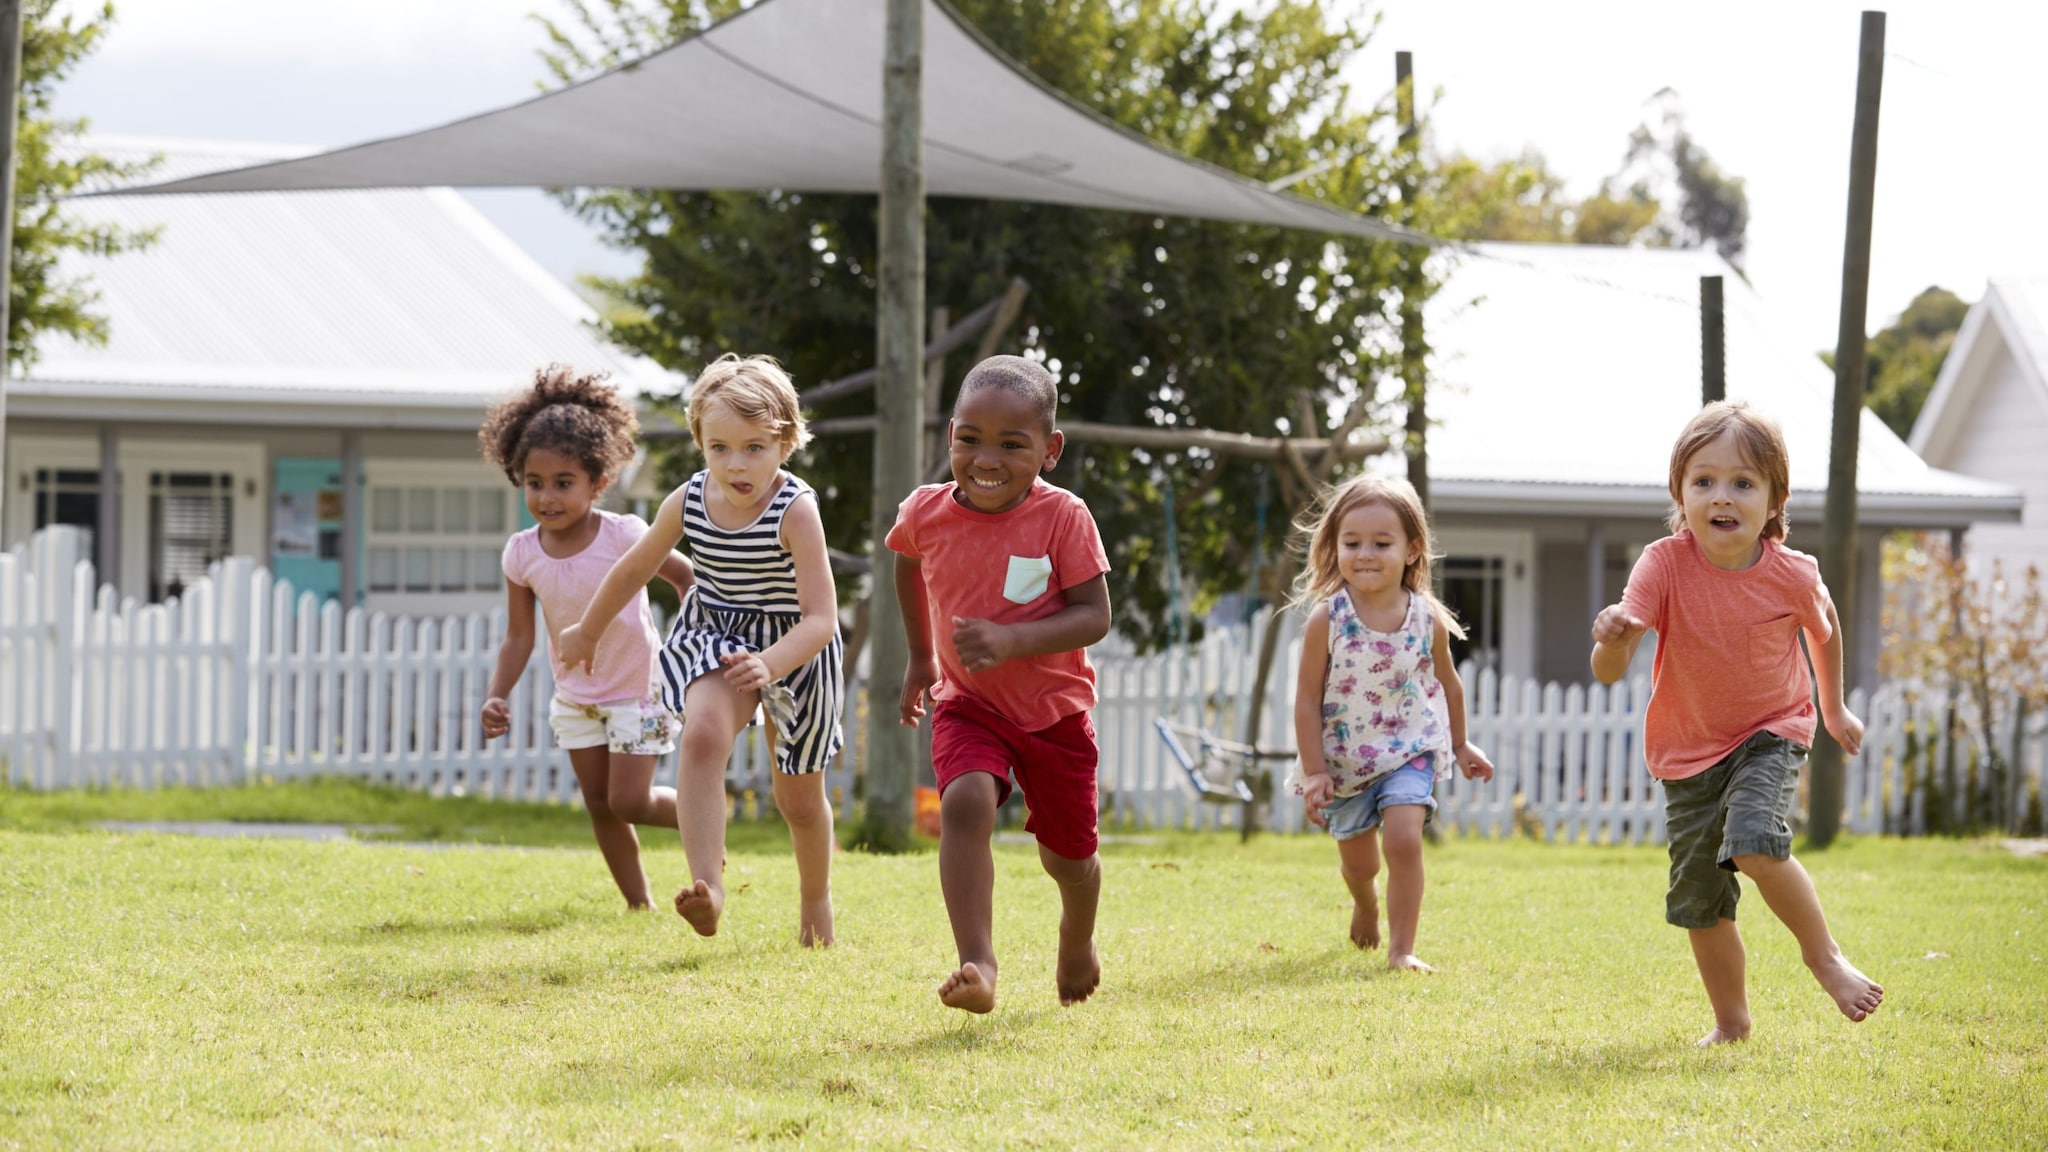 Children of different races smiling and running in an open field.